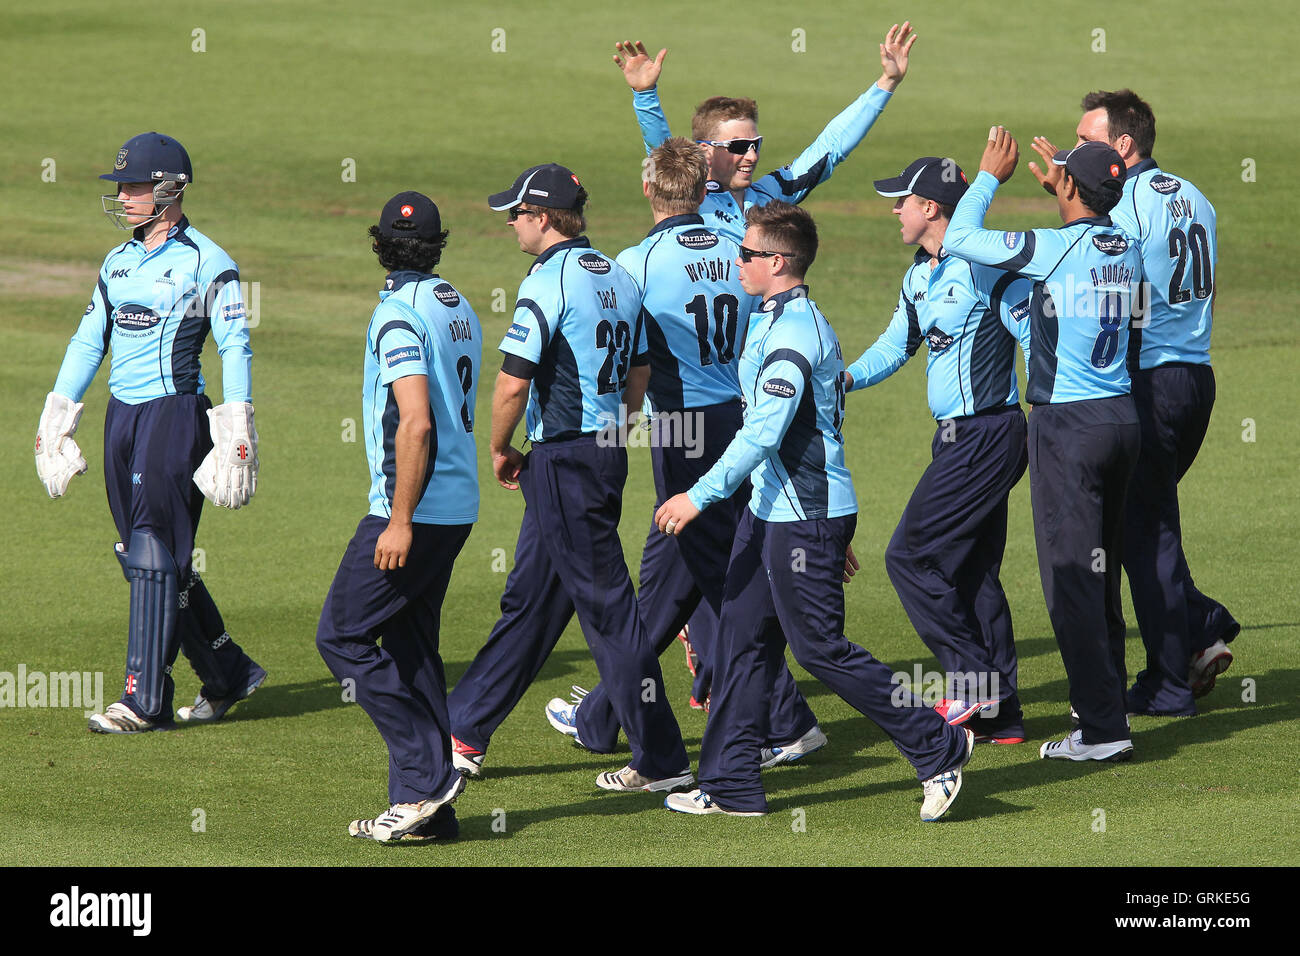 Sussex players celebrate the wicket of Tim Phillips - Sussex Sharks vs Essex Eagles - Friends Life T20 Cricket at the Probiz County Ground, Hove - 24/06/12 Stock Photo